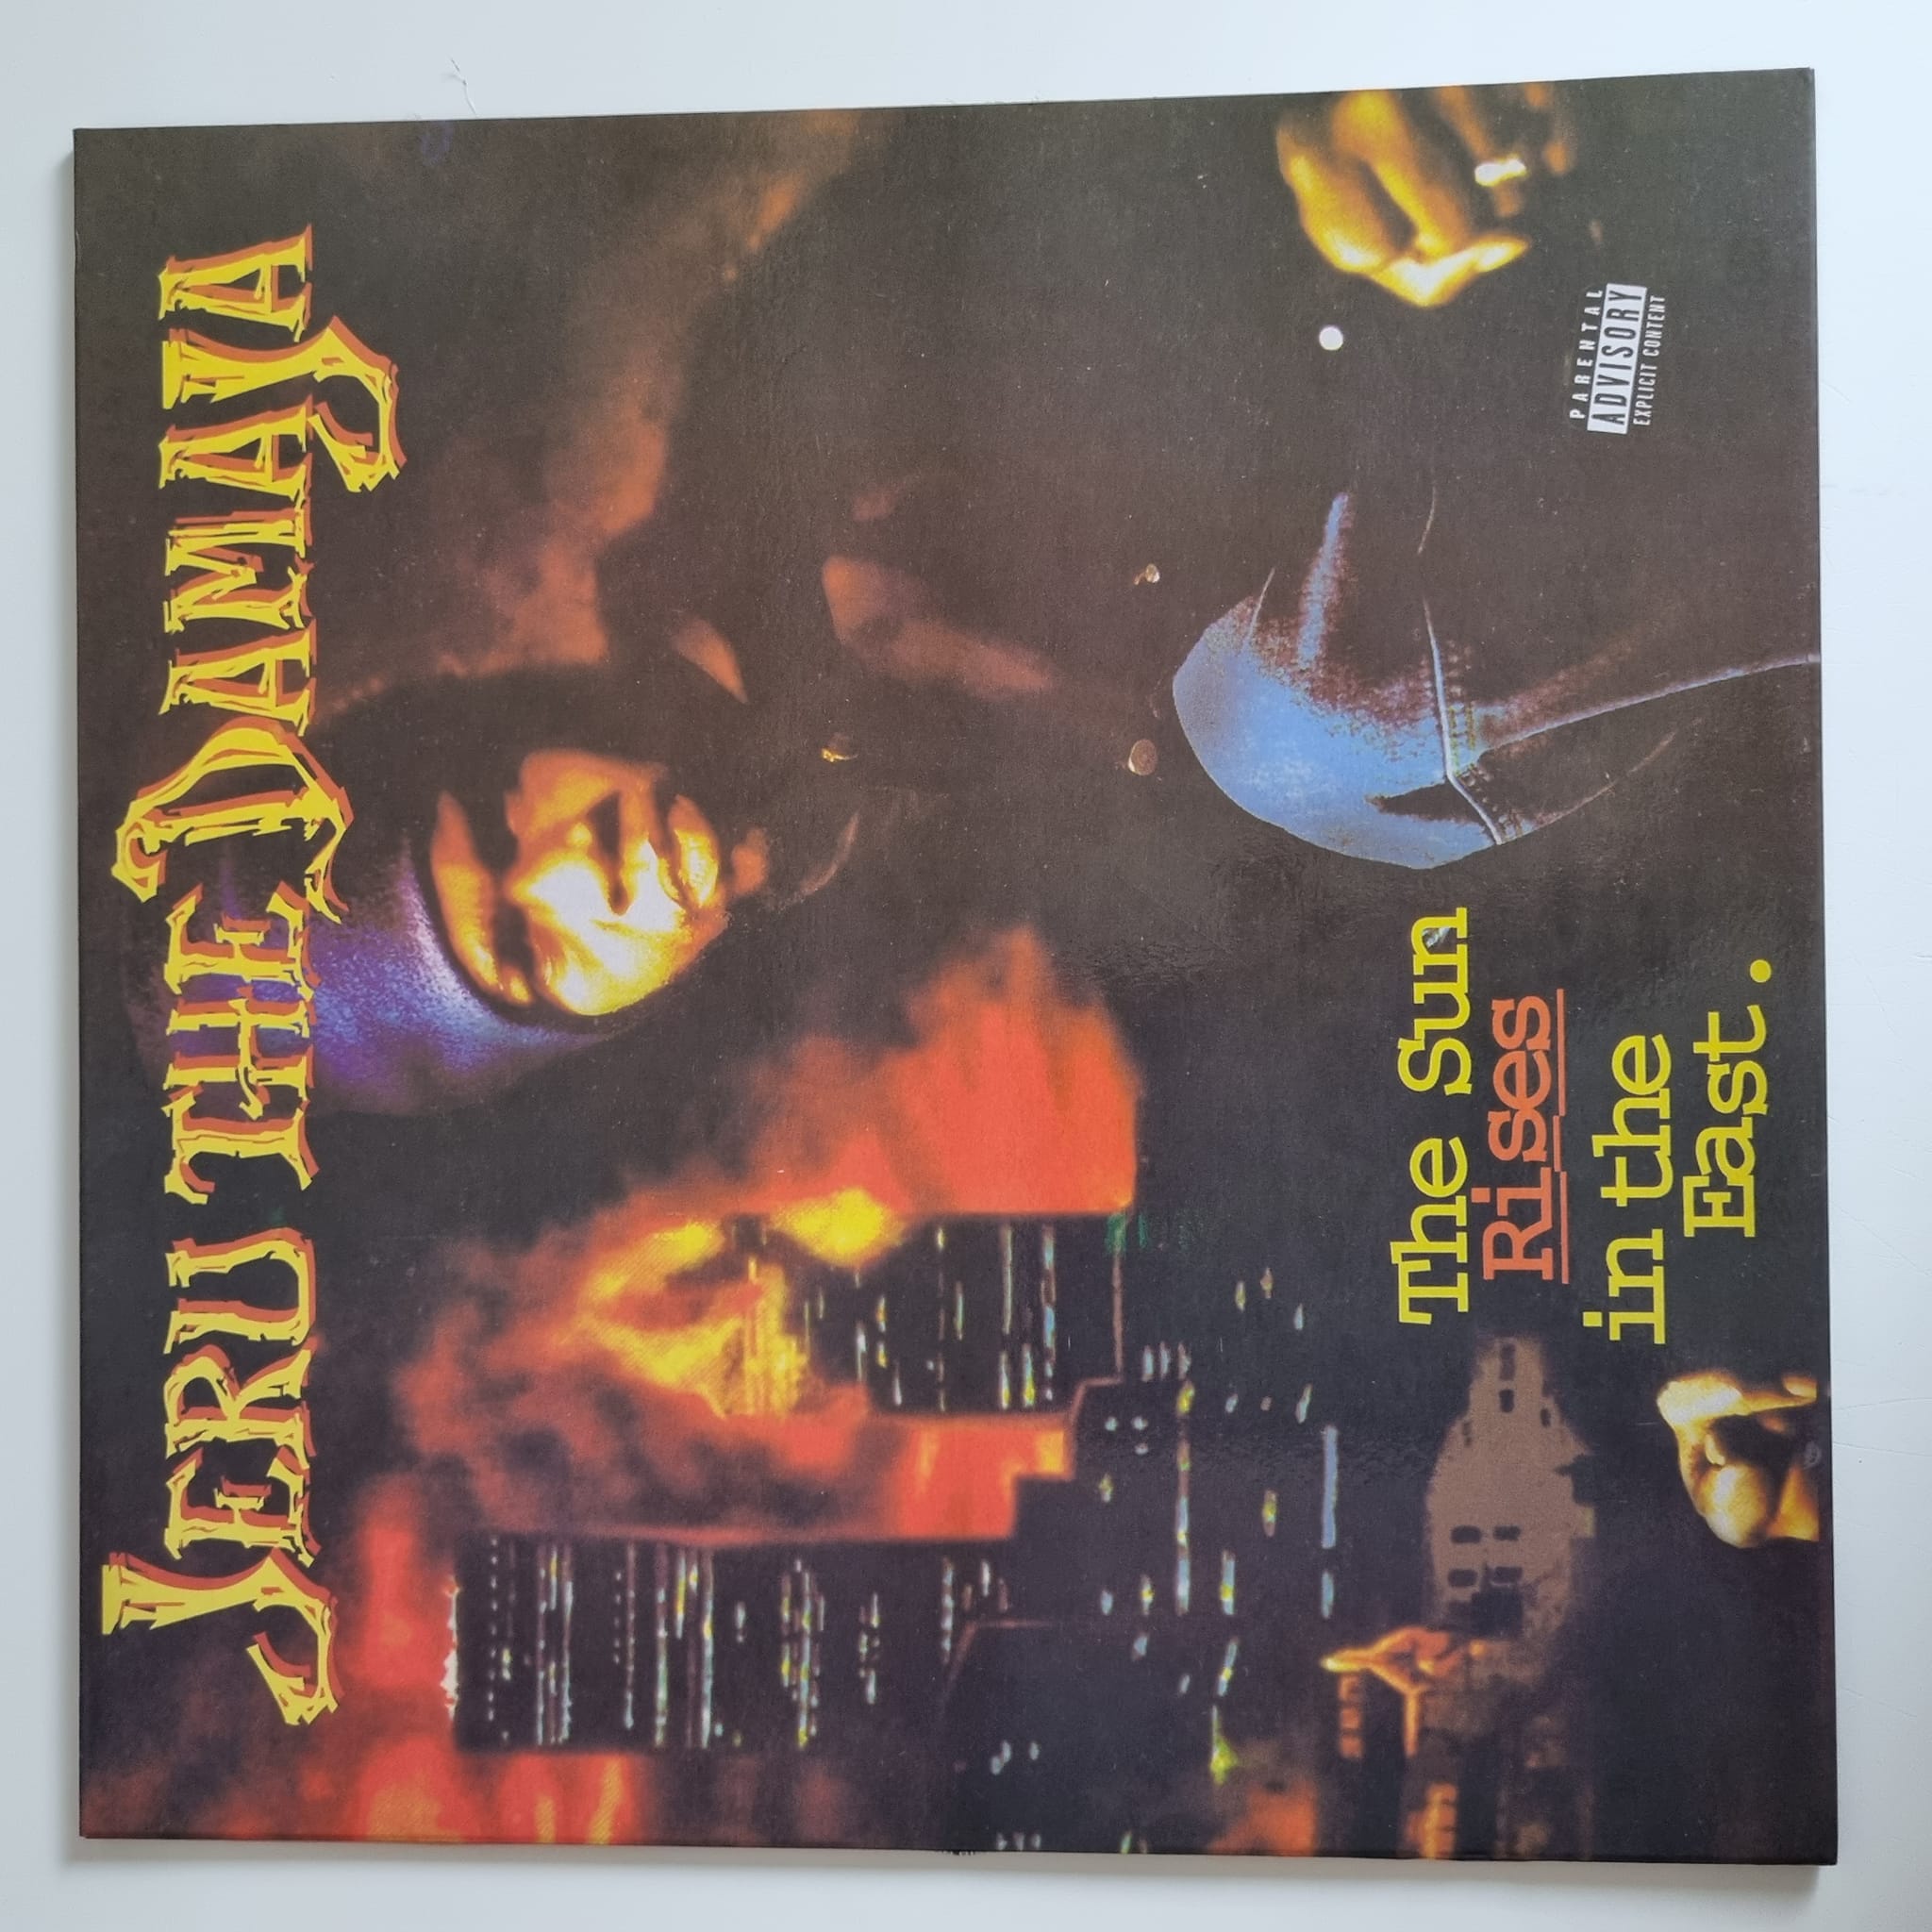 Buy this rare Jeru The Damaja record by clicking here